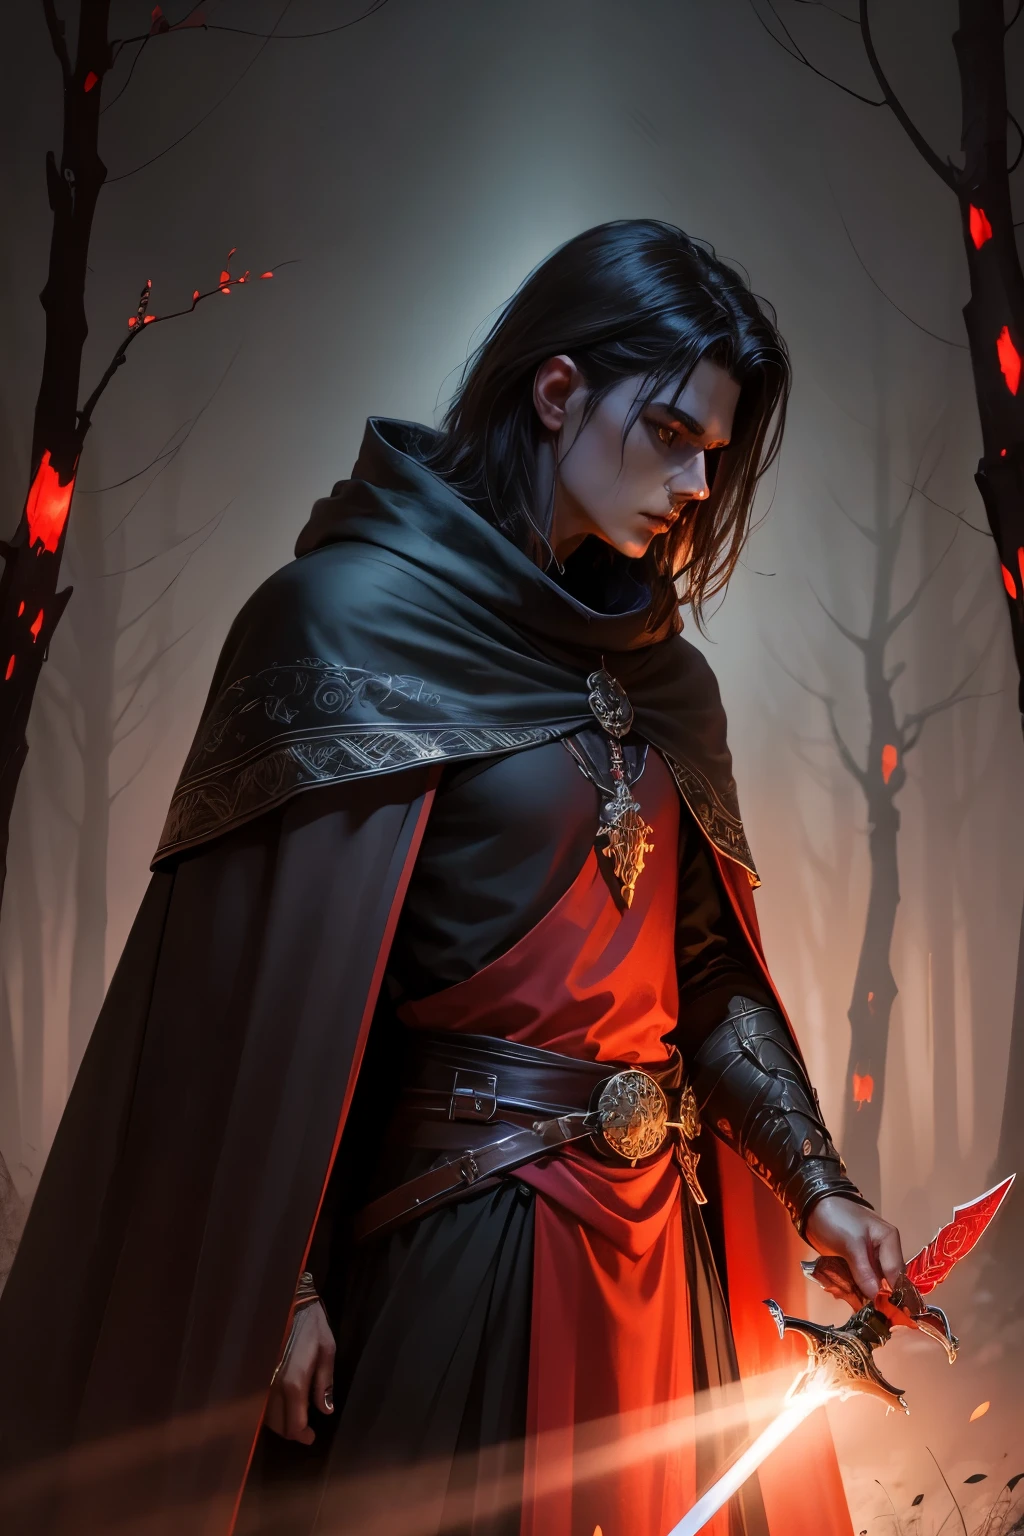 a man in a cloak holding a sword in a dark black and 赤 forest, 森の中で剣を握る, 光る剣 (赤),ダークファンタジースタイル art, ダークファンタジーアートwork, 8k ファンタジーアート, ダークファンタジースタイル, 4Kファンタジーアート, 壮大なファンタジーアートスタイルHD, ダークファンタジーアート, ダークファンタジーコンセプトアート, デジタルアートスタイルの壮大なファンタジー, in style of ダークファンタジーアート, 光る剣 in hand